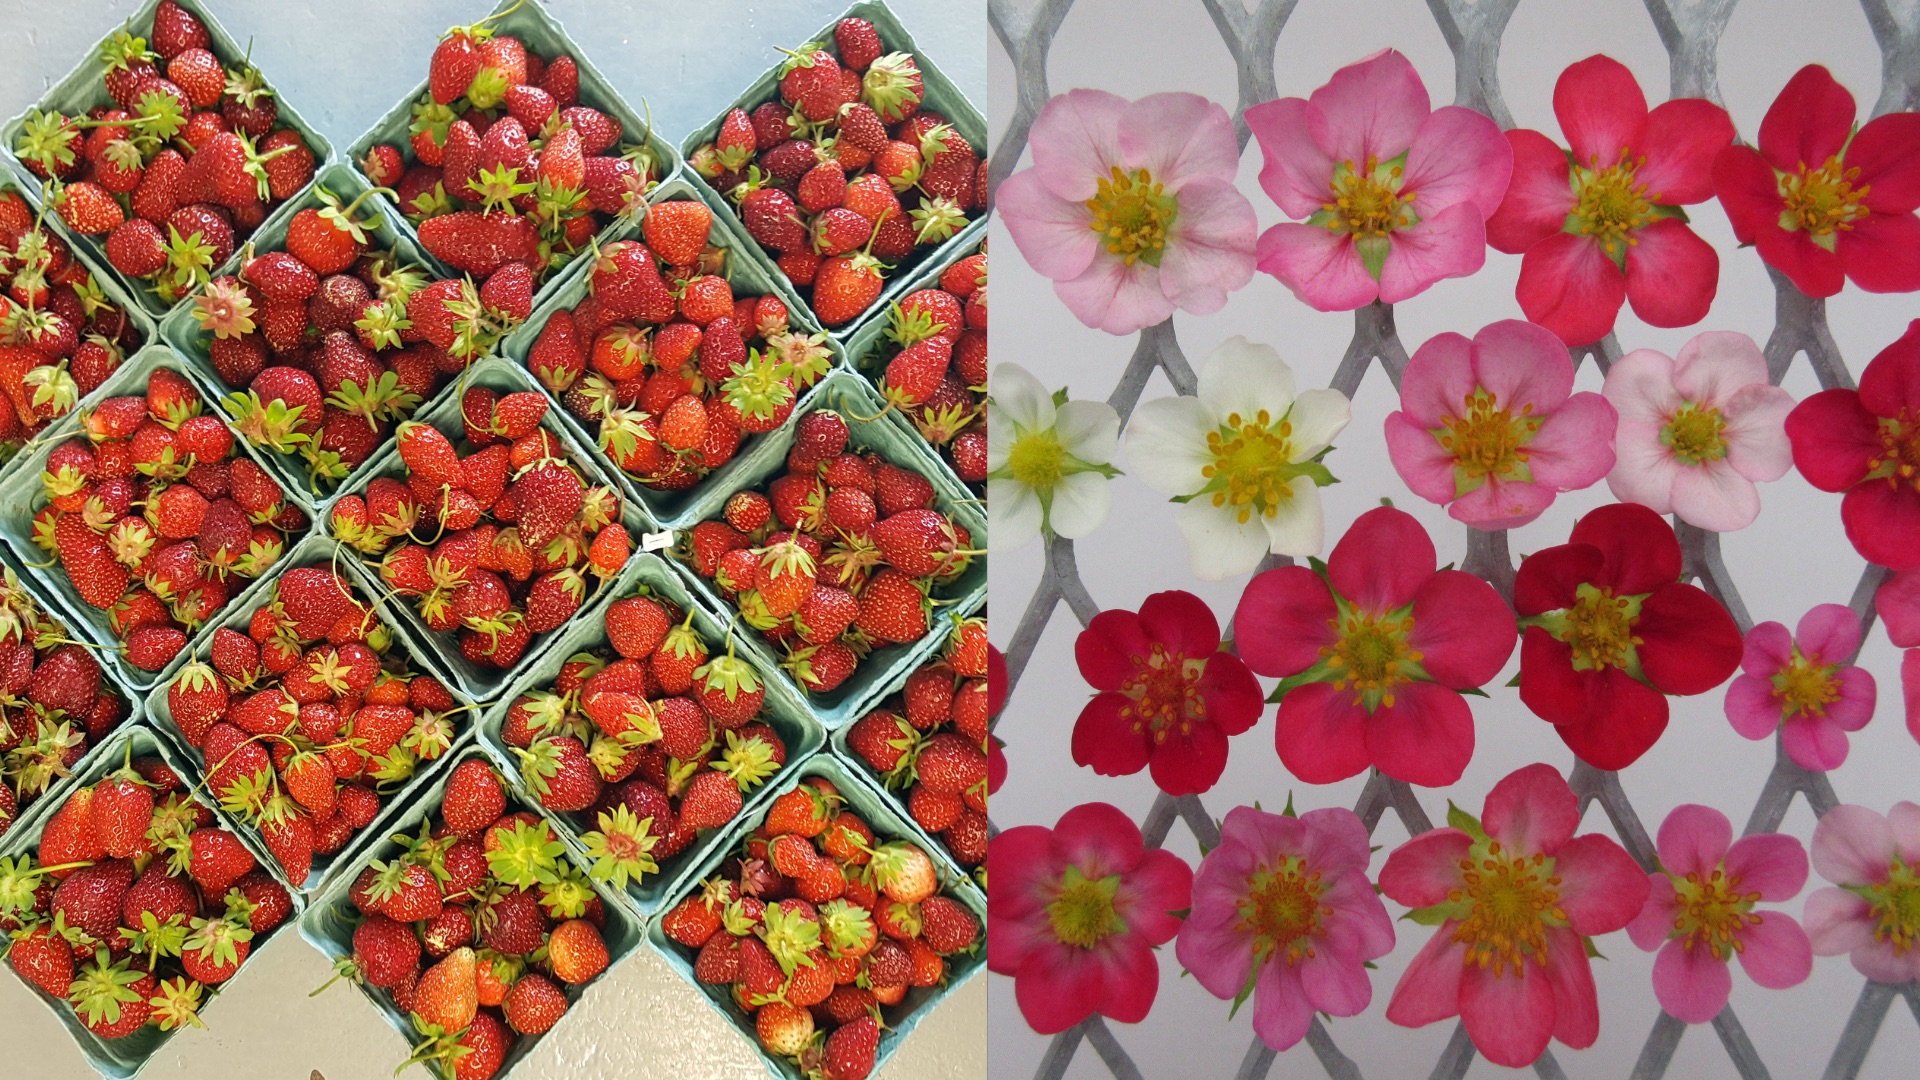 A photo of strawberries (on the left) and ornamental strawberry flowers (right) for the Inspired Horticultural Report